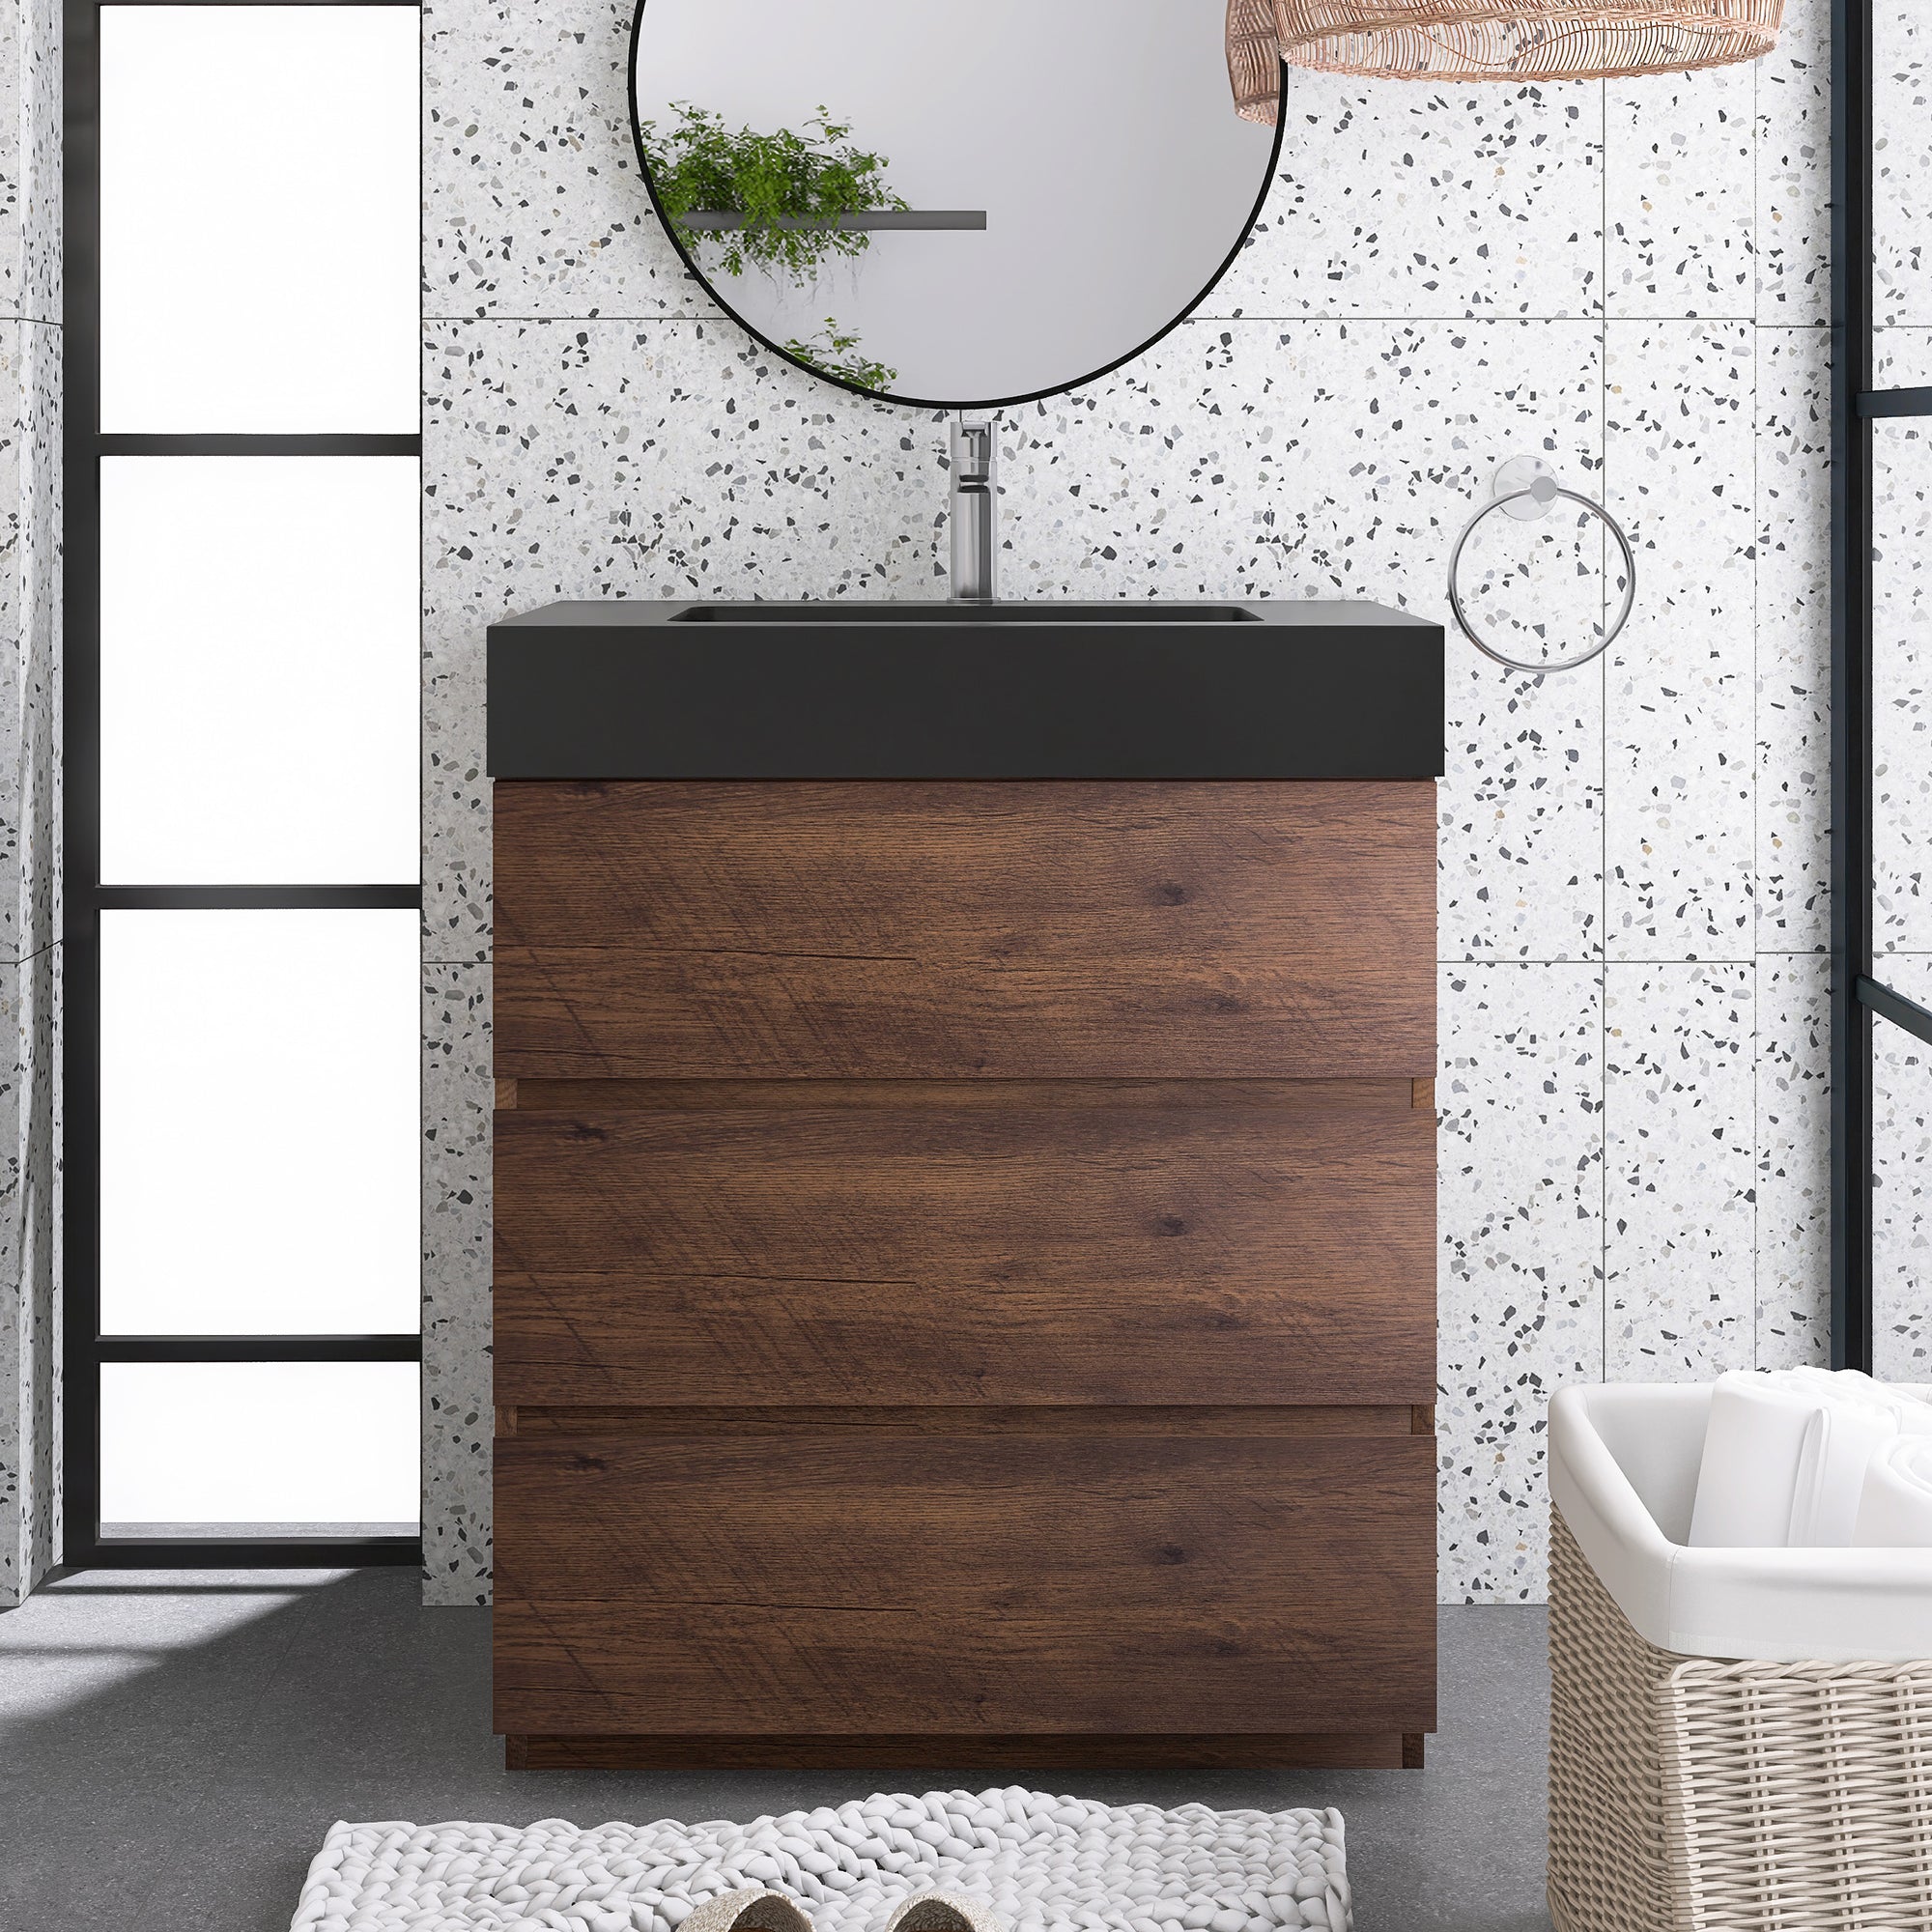 Staykiwi Freestanding Bathroom Vanity Set with Integrated Solid Surface Sink